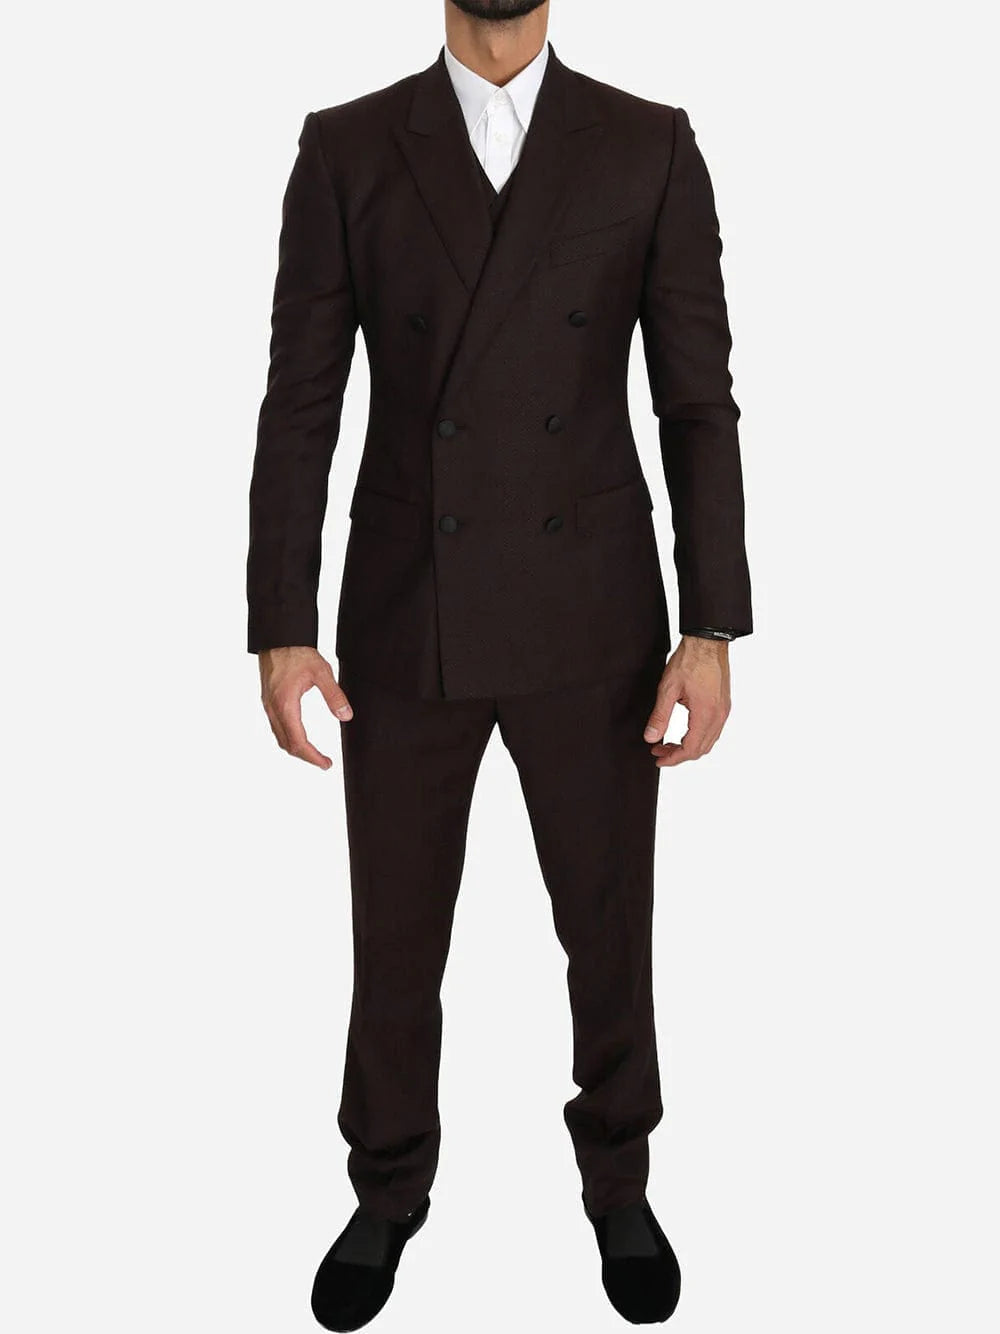 Dolce & Gabbana Martini Double-Breasted Three-Piece Suit